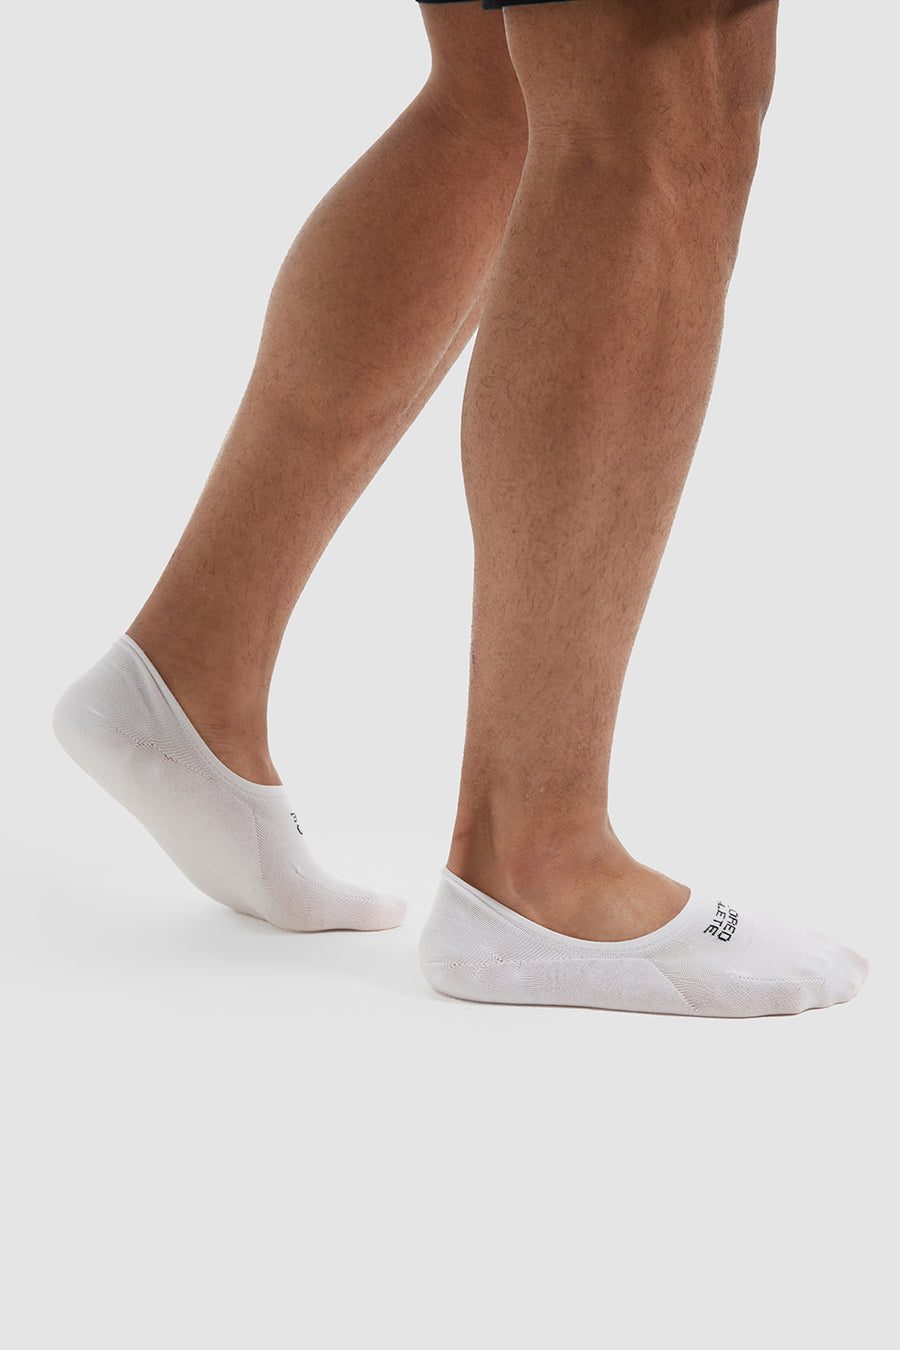 6 Pack No Show Socks In White - TAILORED ATHLETE - USA